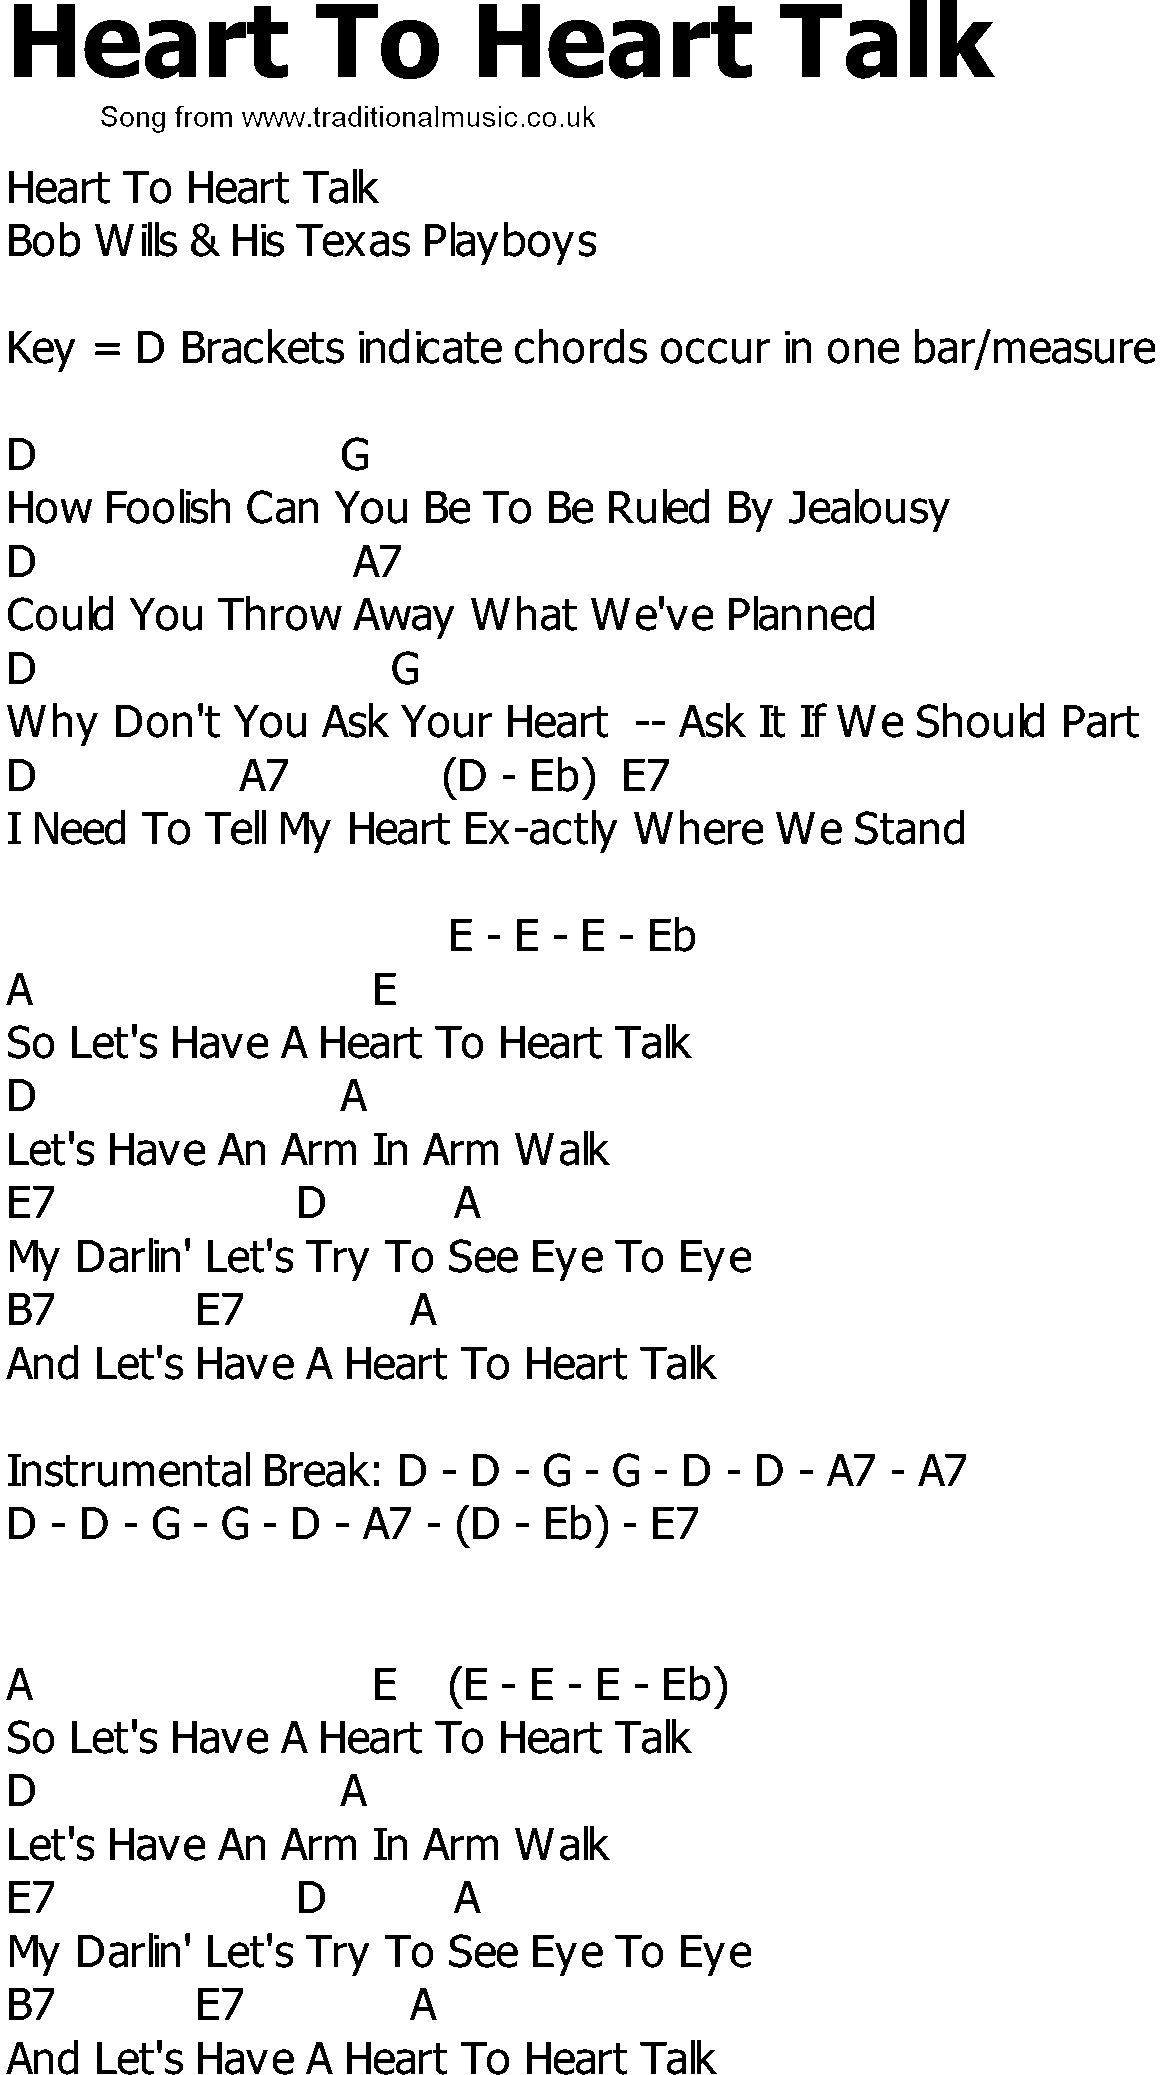 Old Country song lyrics with chords - Heart To Heart Talk